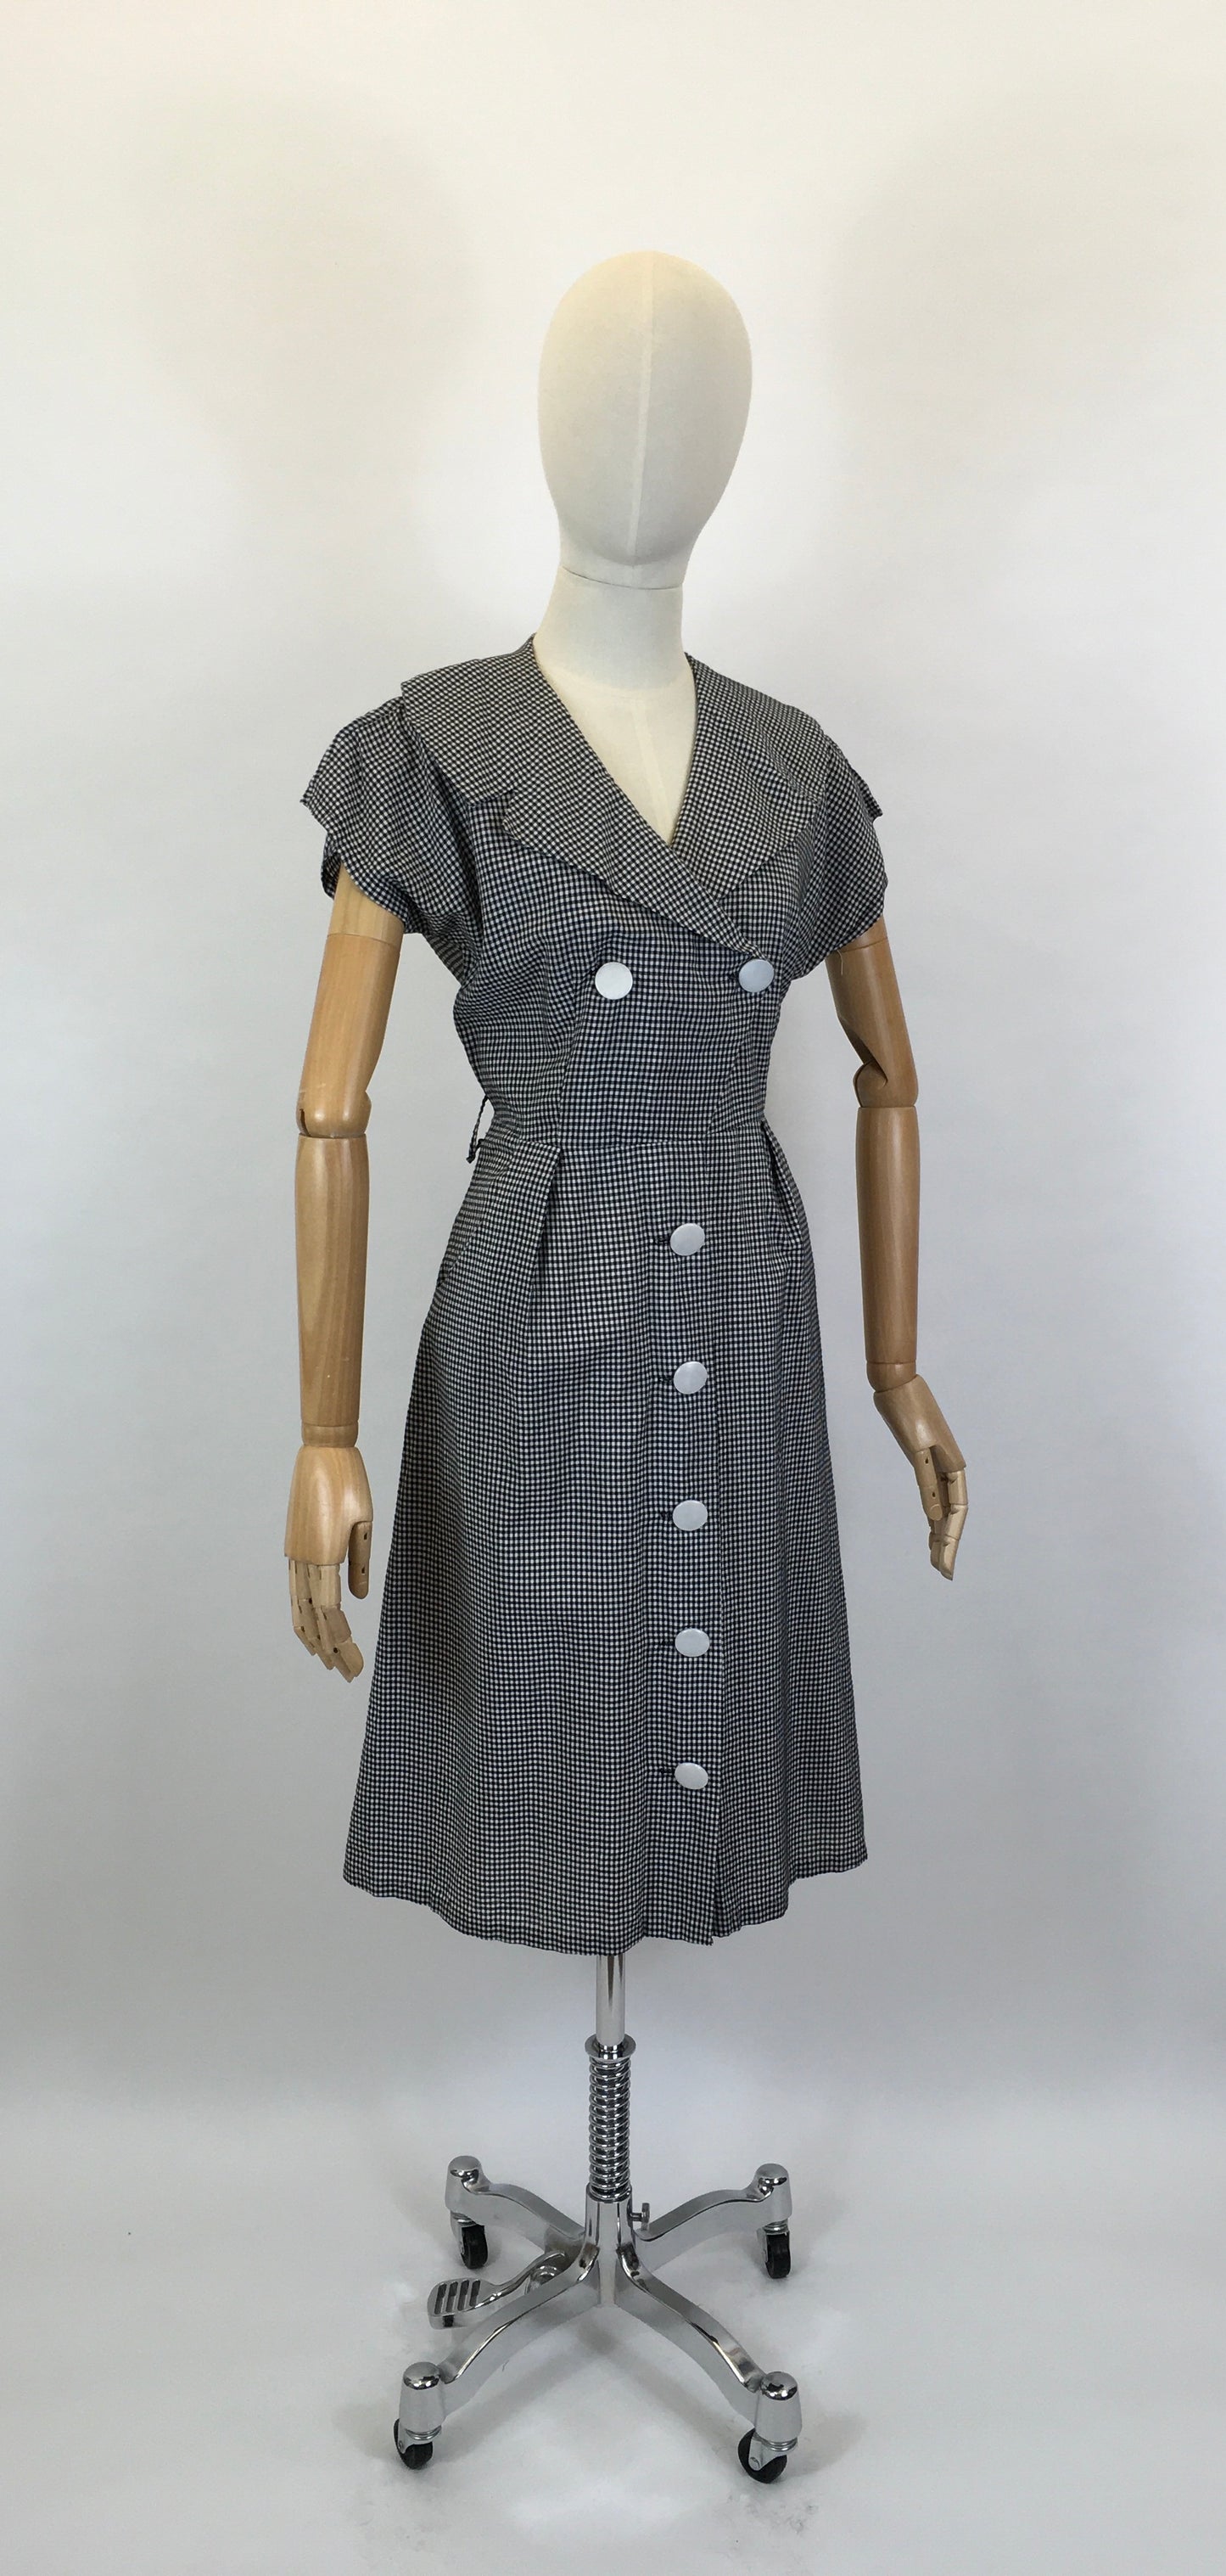 Original 1950’s Fabulous Cotton Day Dress - In A Black And White Gingham Check